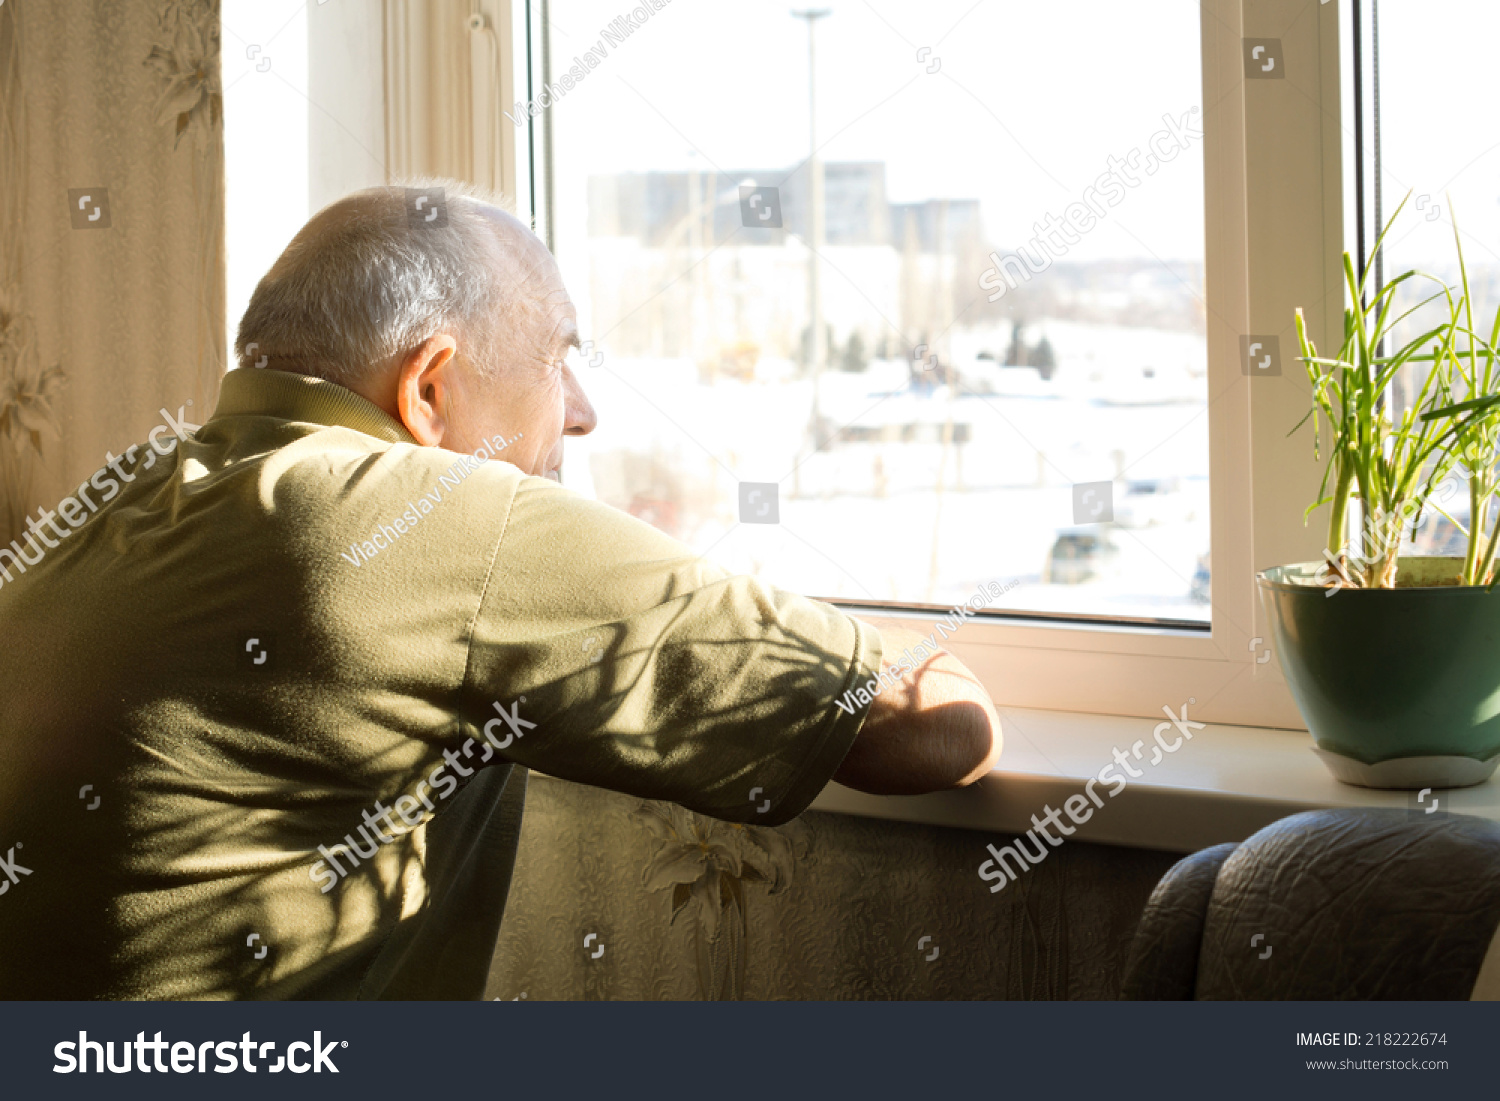 http://image.shutterstock.com/z/stock-photo-lonely-old-man-in-an-old-age-home-staring-out-of-a-window-as-he-longs-for-his-freedom-and-friends-218222674.jpg